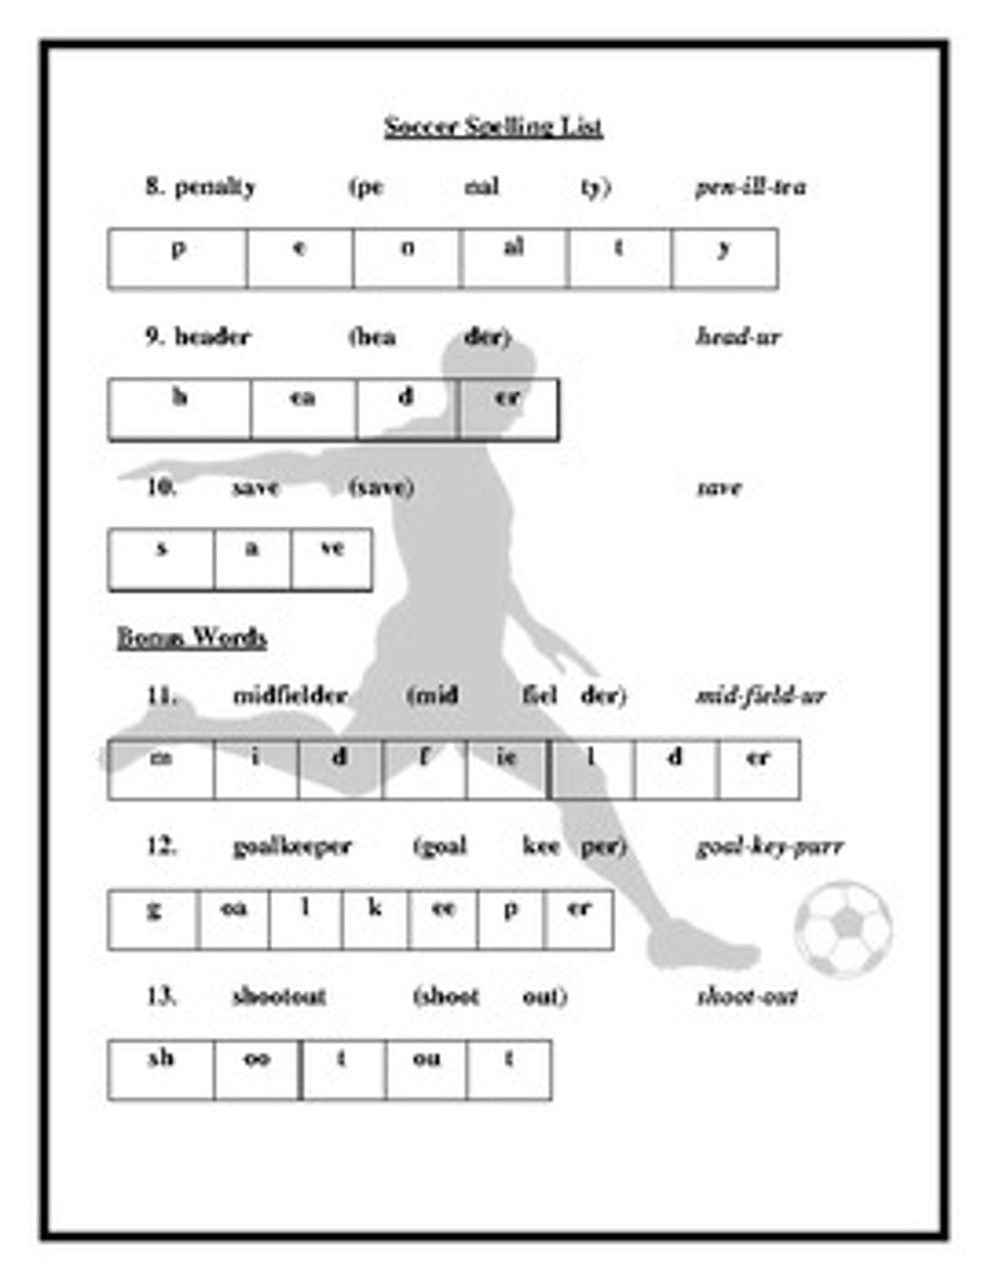 Soccer Spelling List - Amped Up Learning